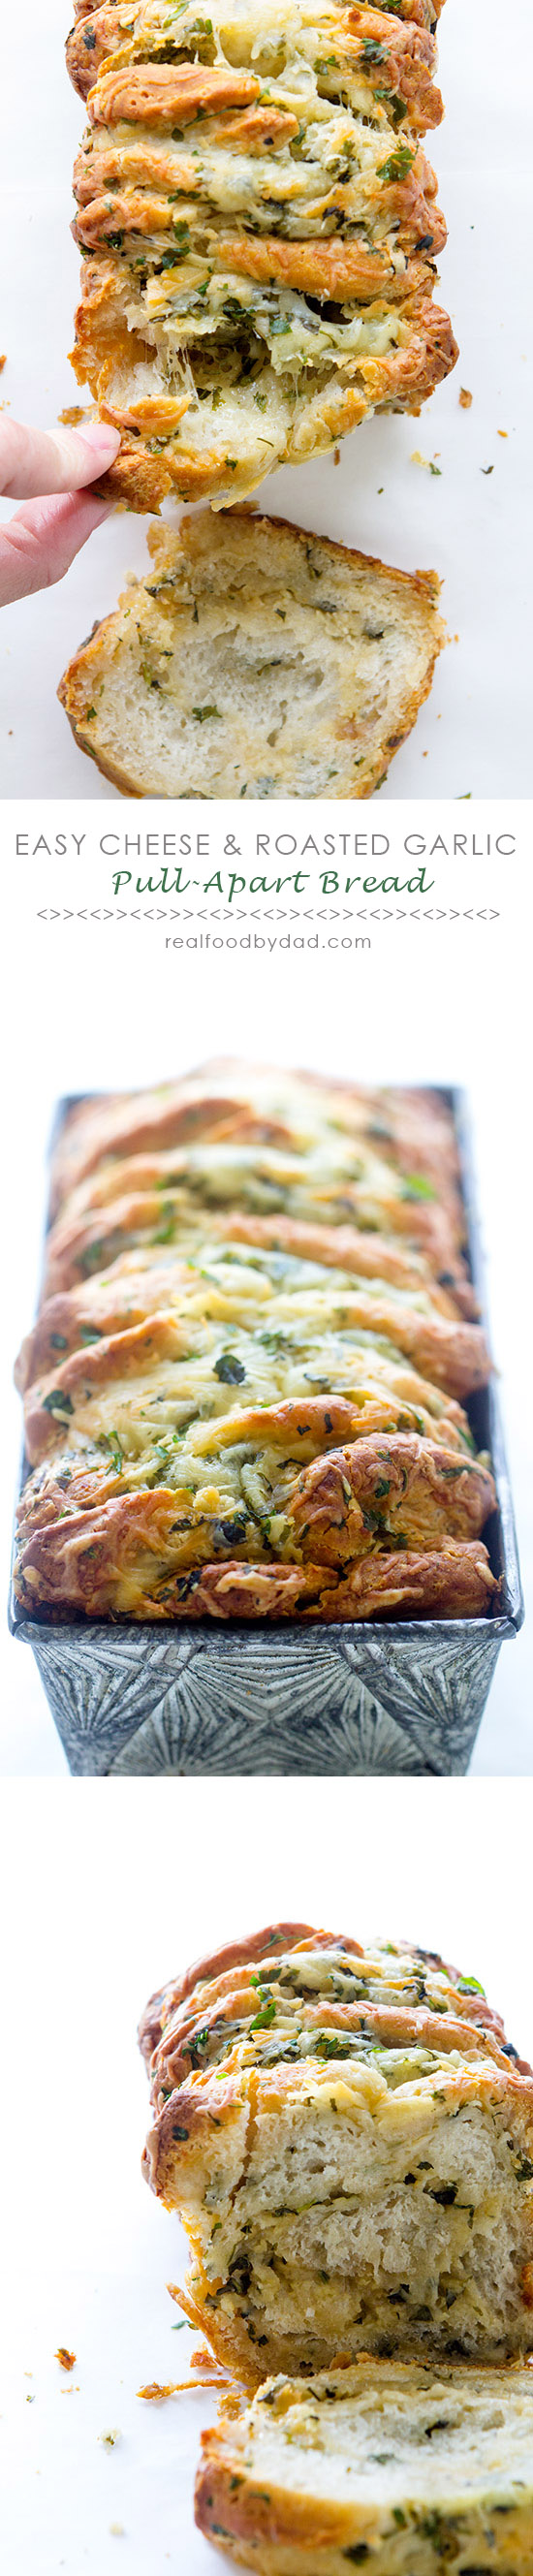 Easy Cheese and Garlic Pull-Apart Bread